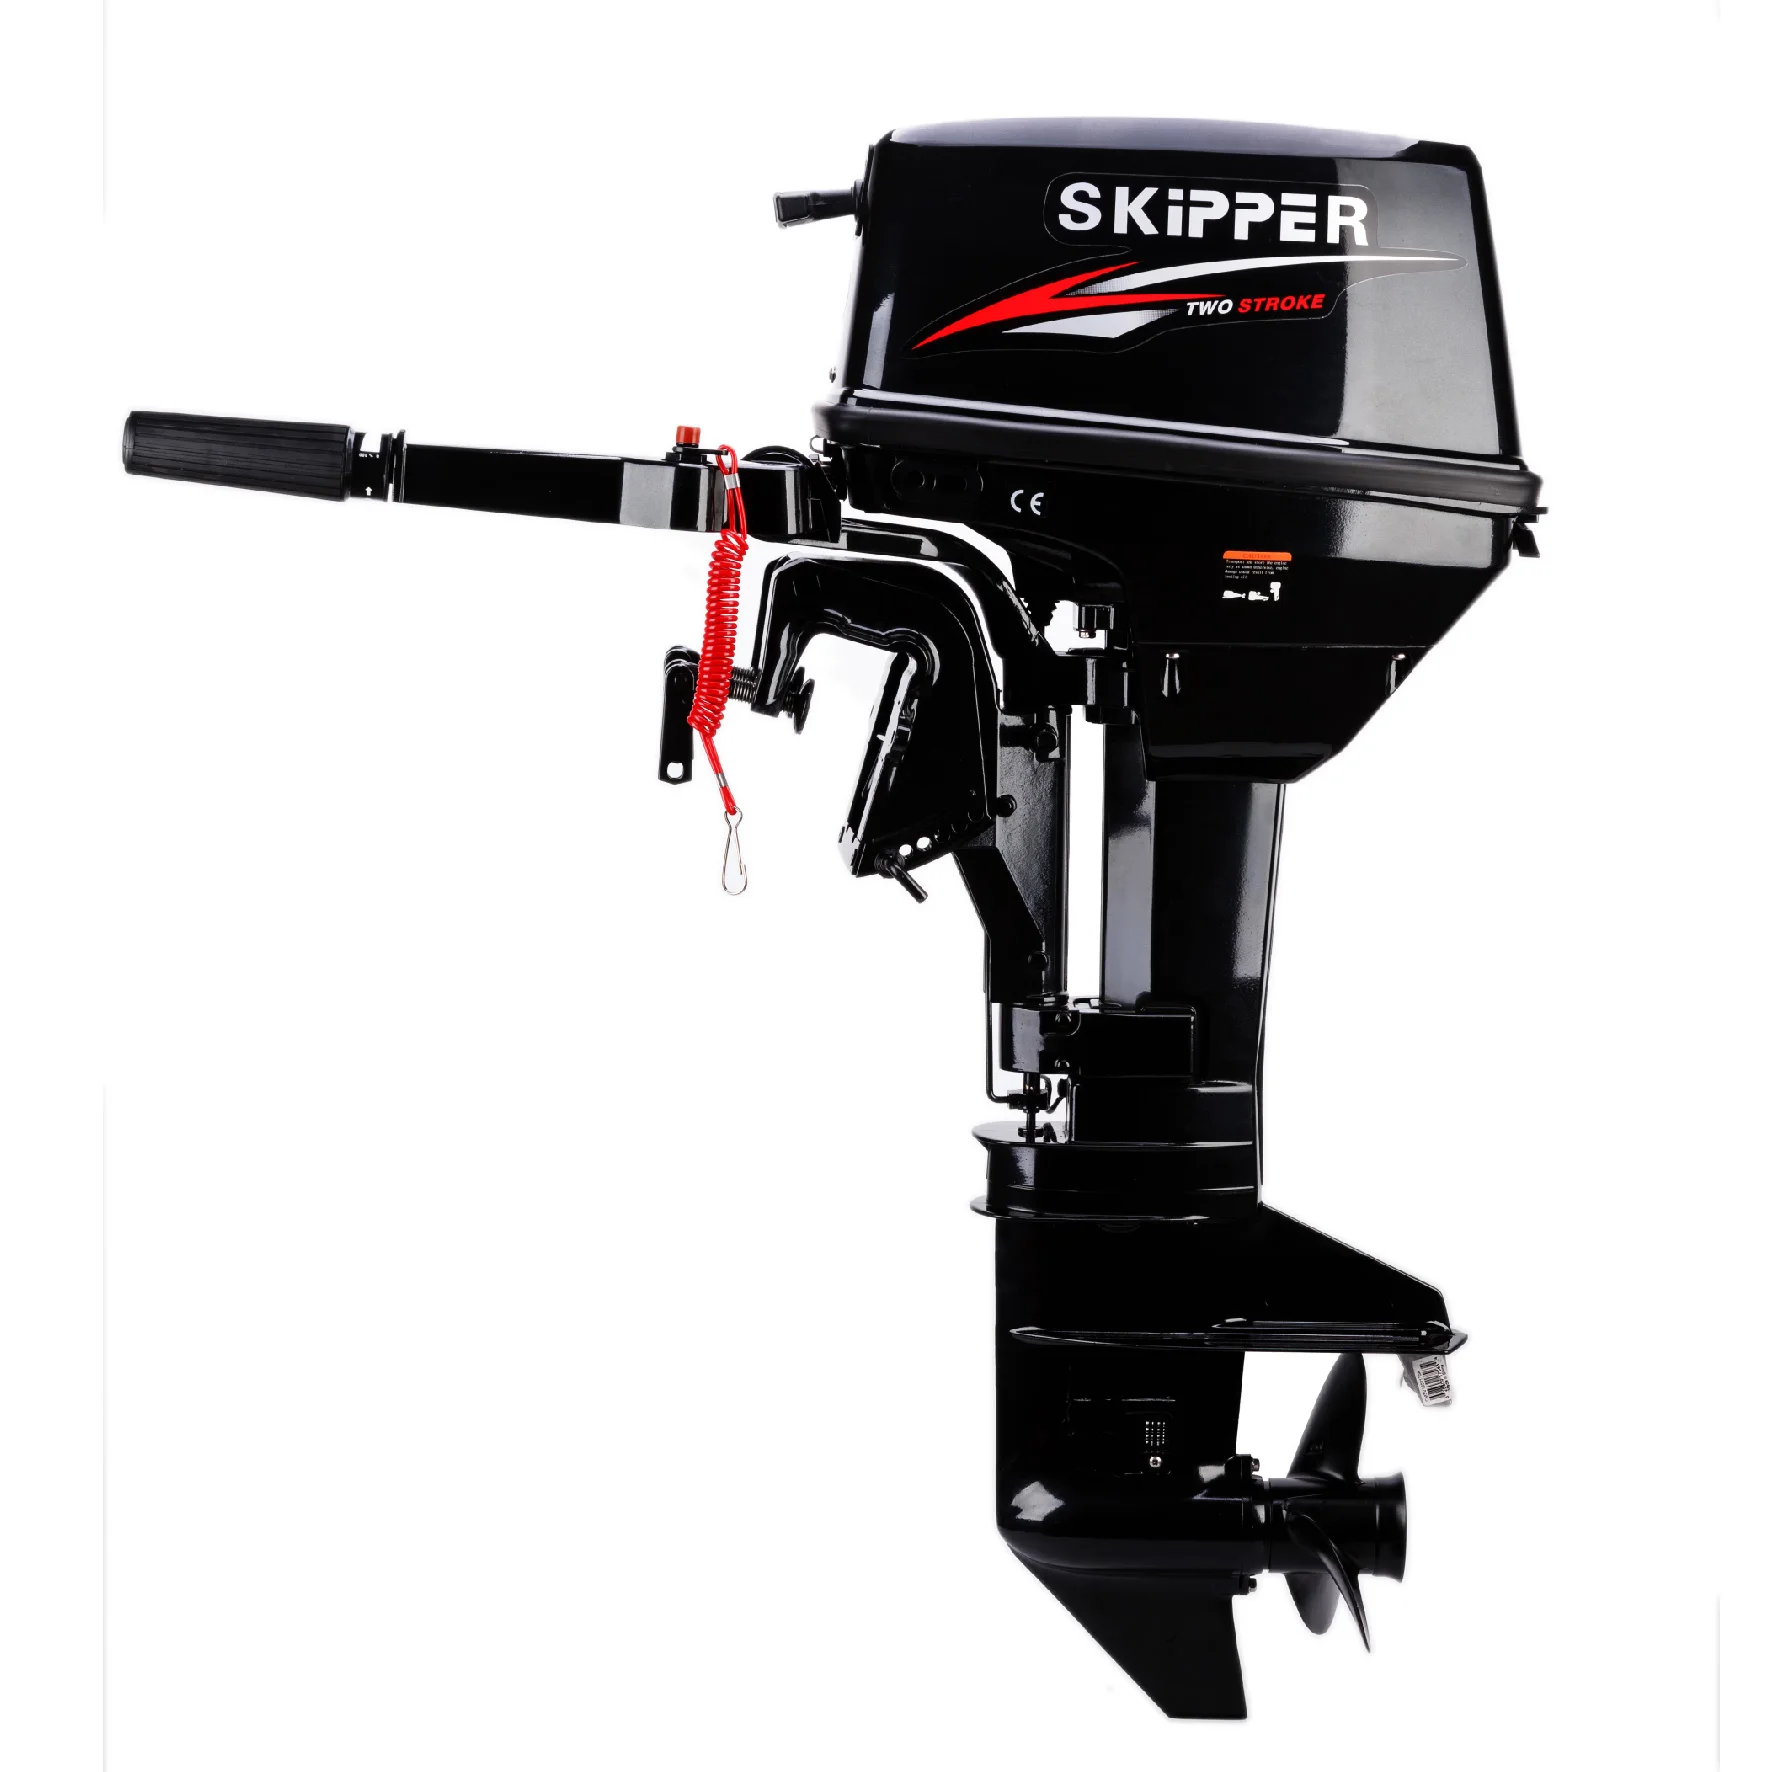 Outboard Motor 9.8hp New 2 Stroke Long Shaft Good Quality Outboard Boat Engine ac servo motor for cnc lathe industry 1kw 2000rpm 4 77nm best price and good quality